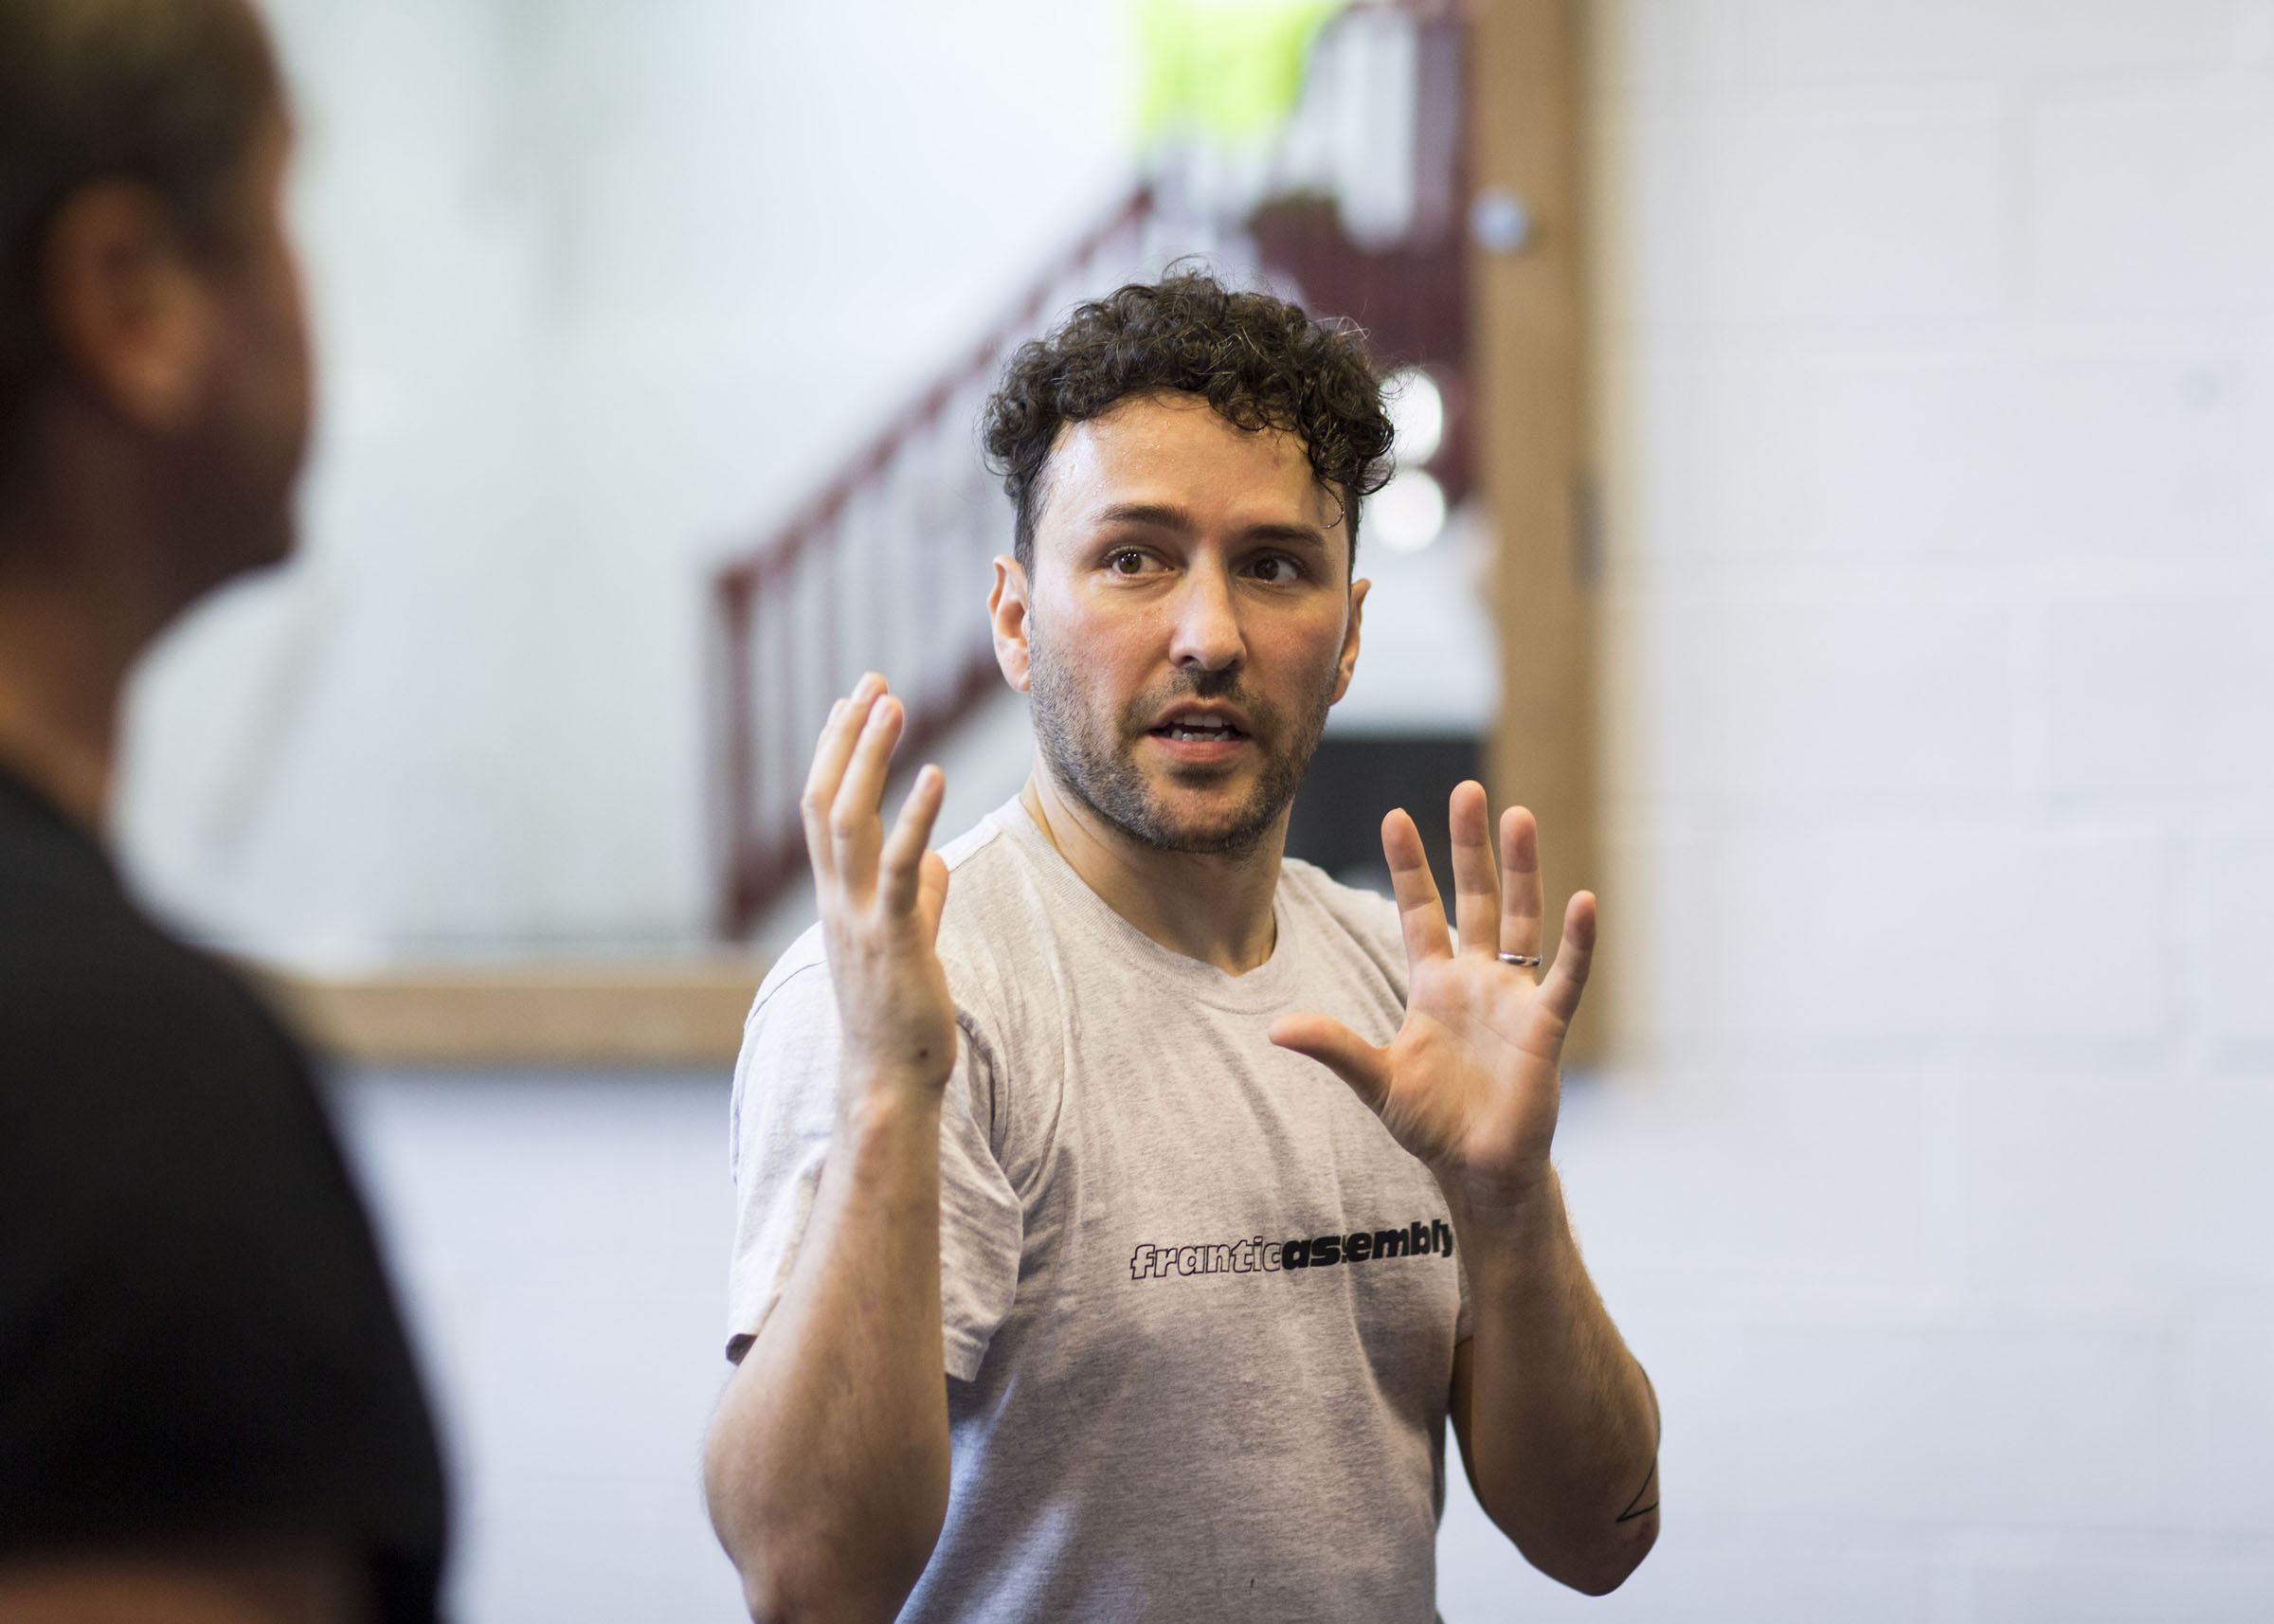 Richard Mylan rehearsing for 'Things I know to be True'